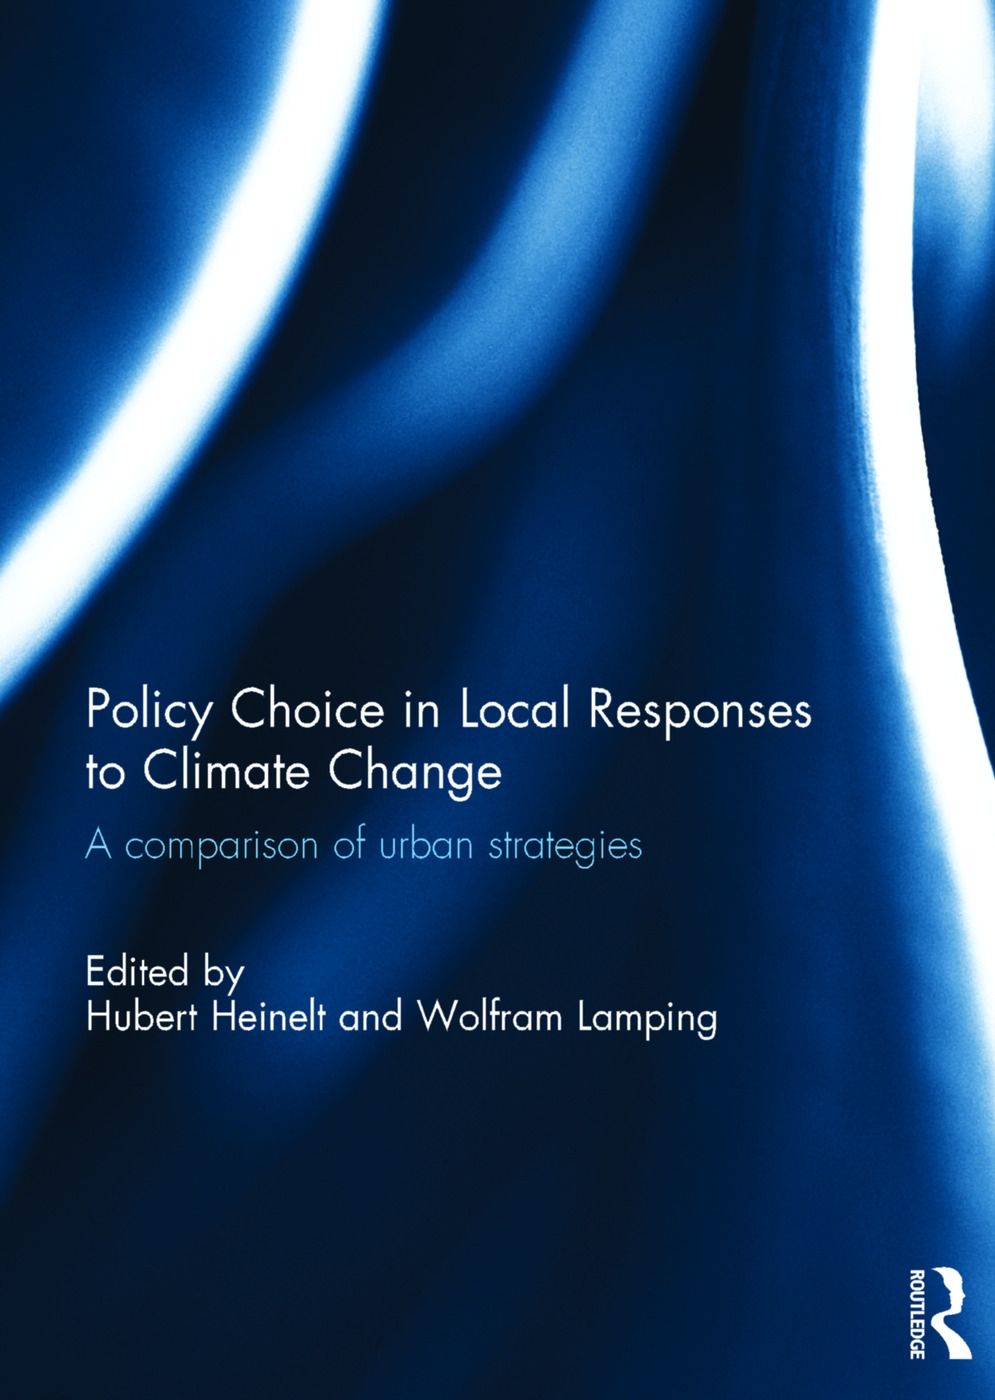 Policy Choice in Local Responses to Climate Change: A Comparison of Urban Strategies